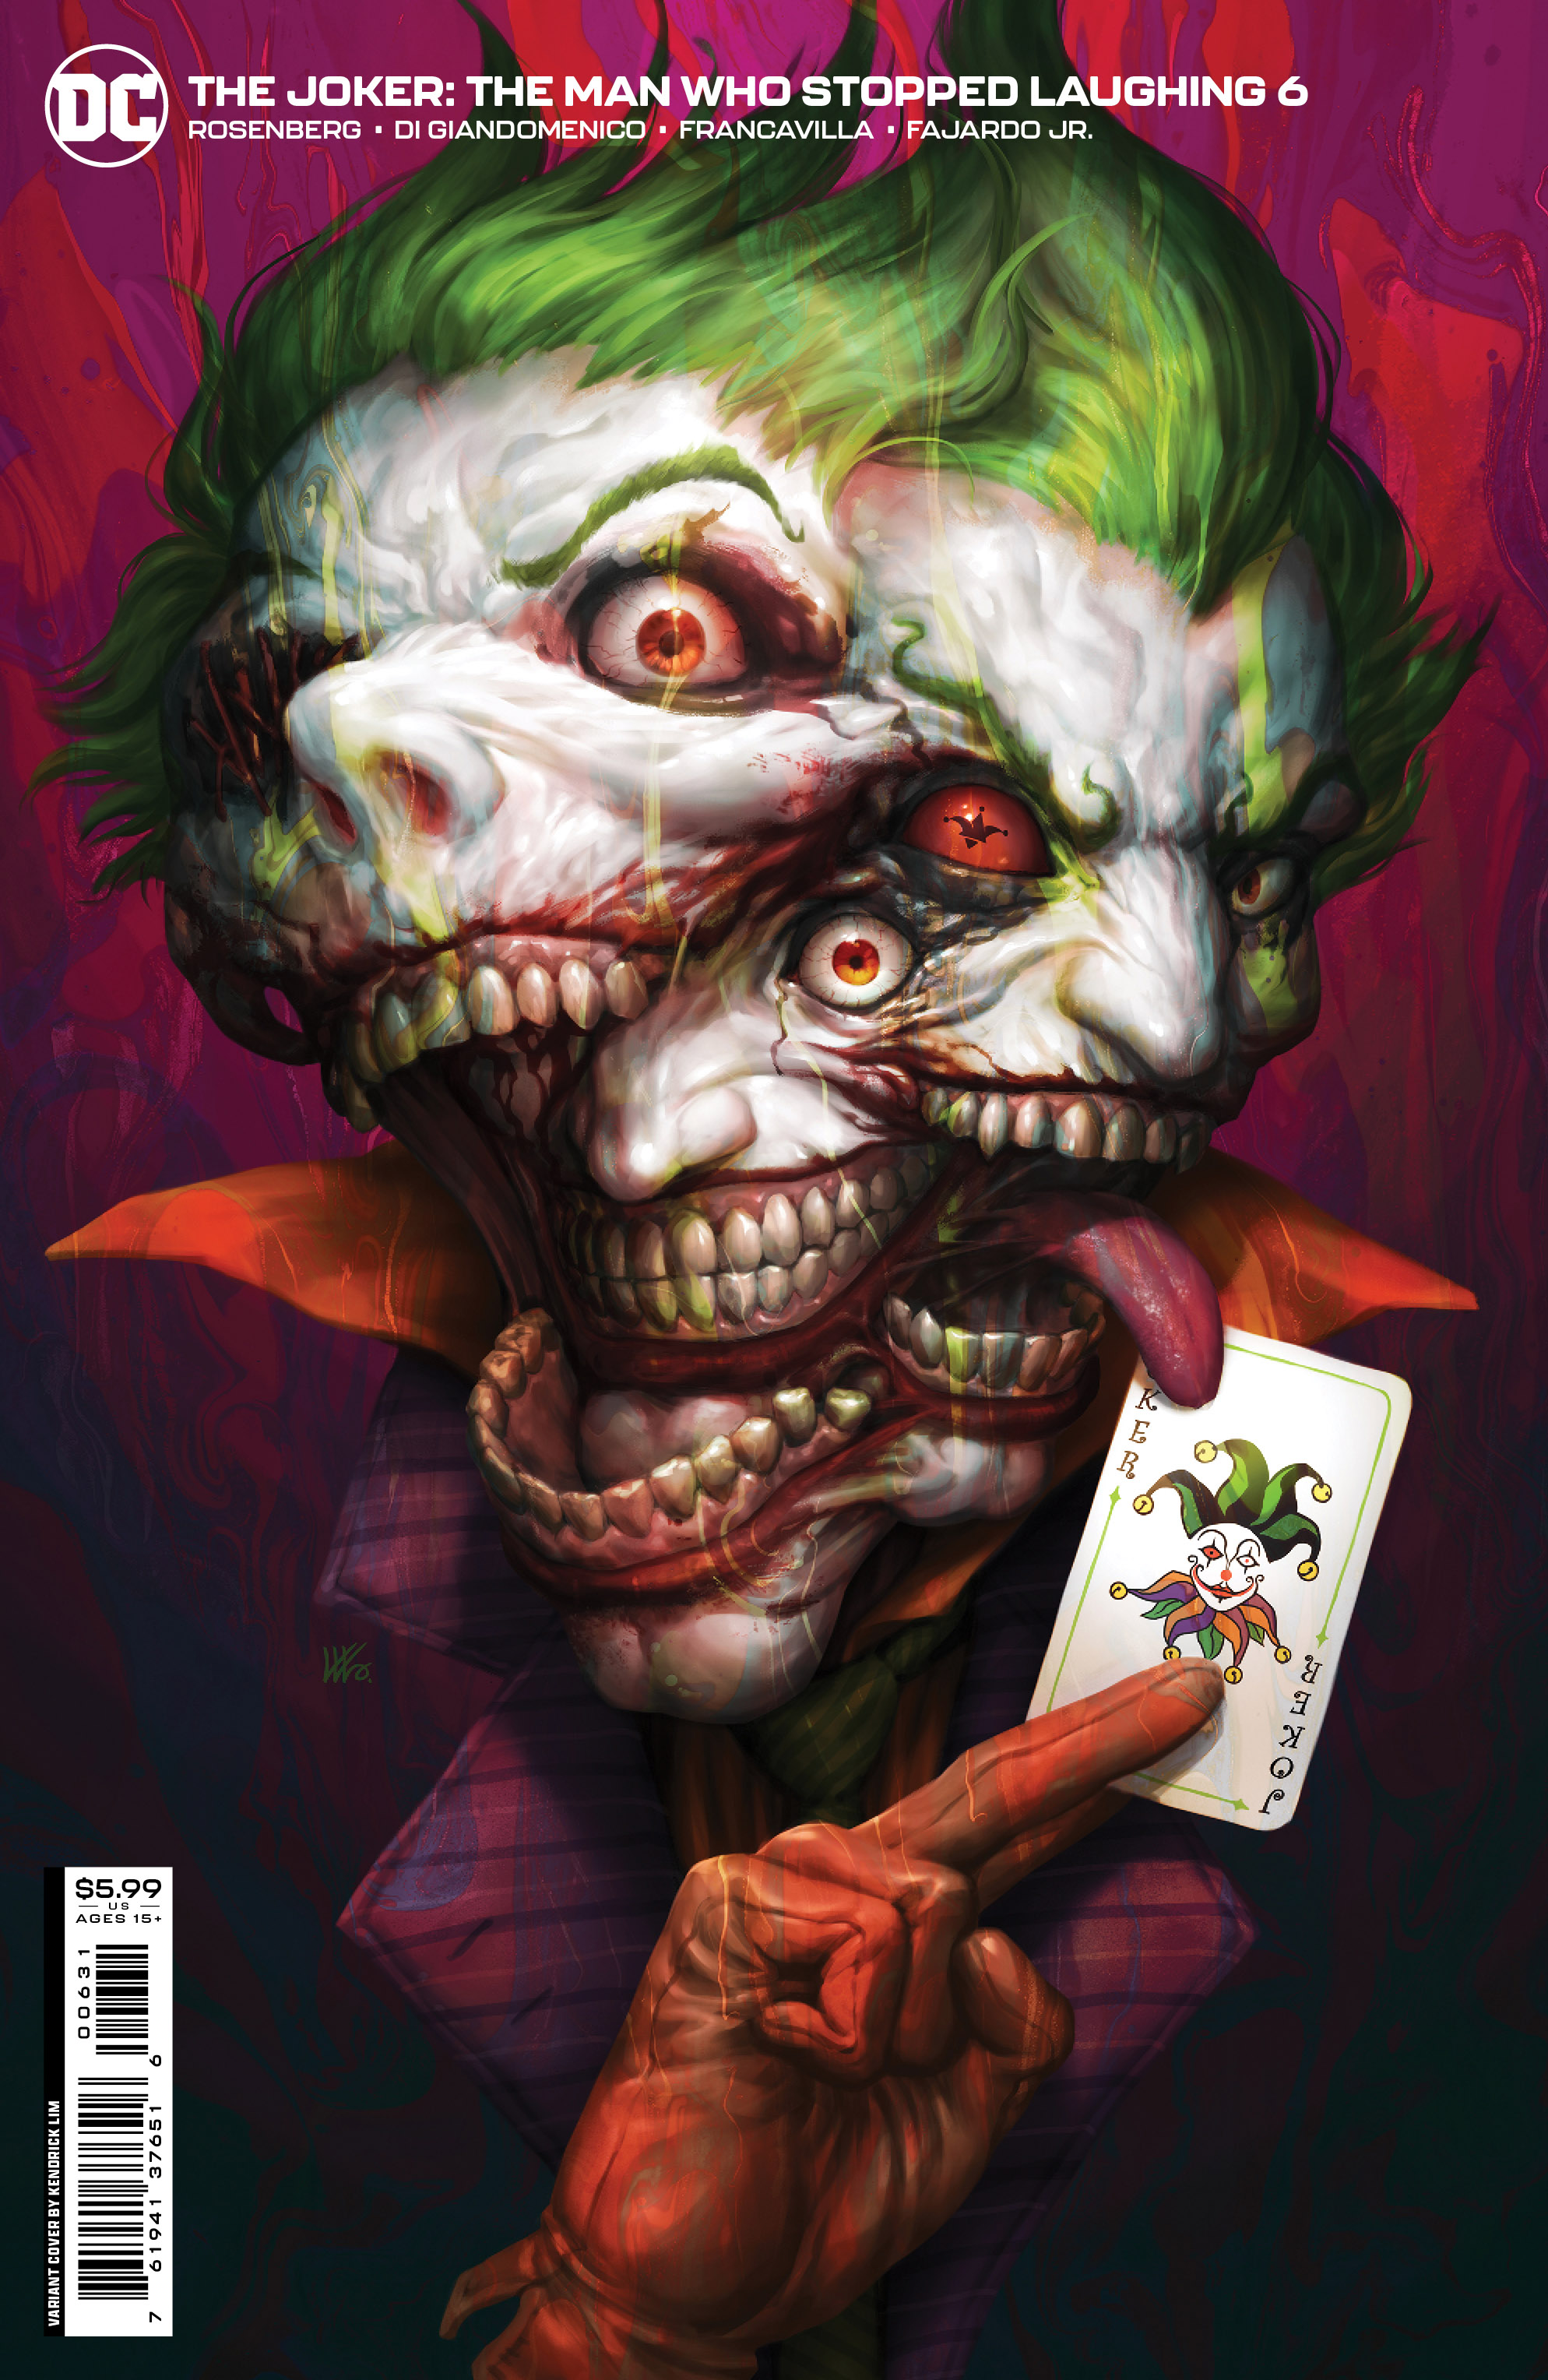 Joker The Man Who Stopped Laughing #6 Cover C Kendrick Kunkka Lim Variant